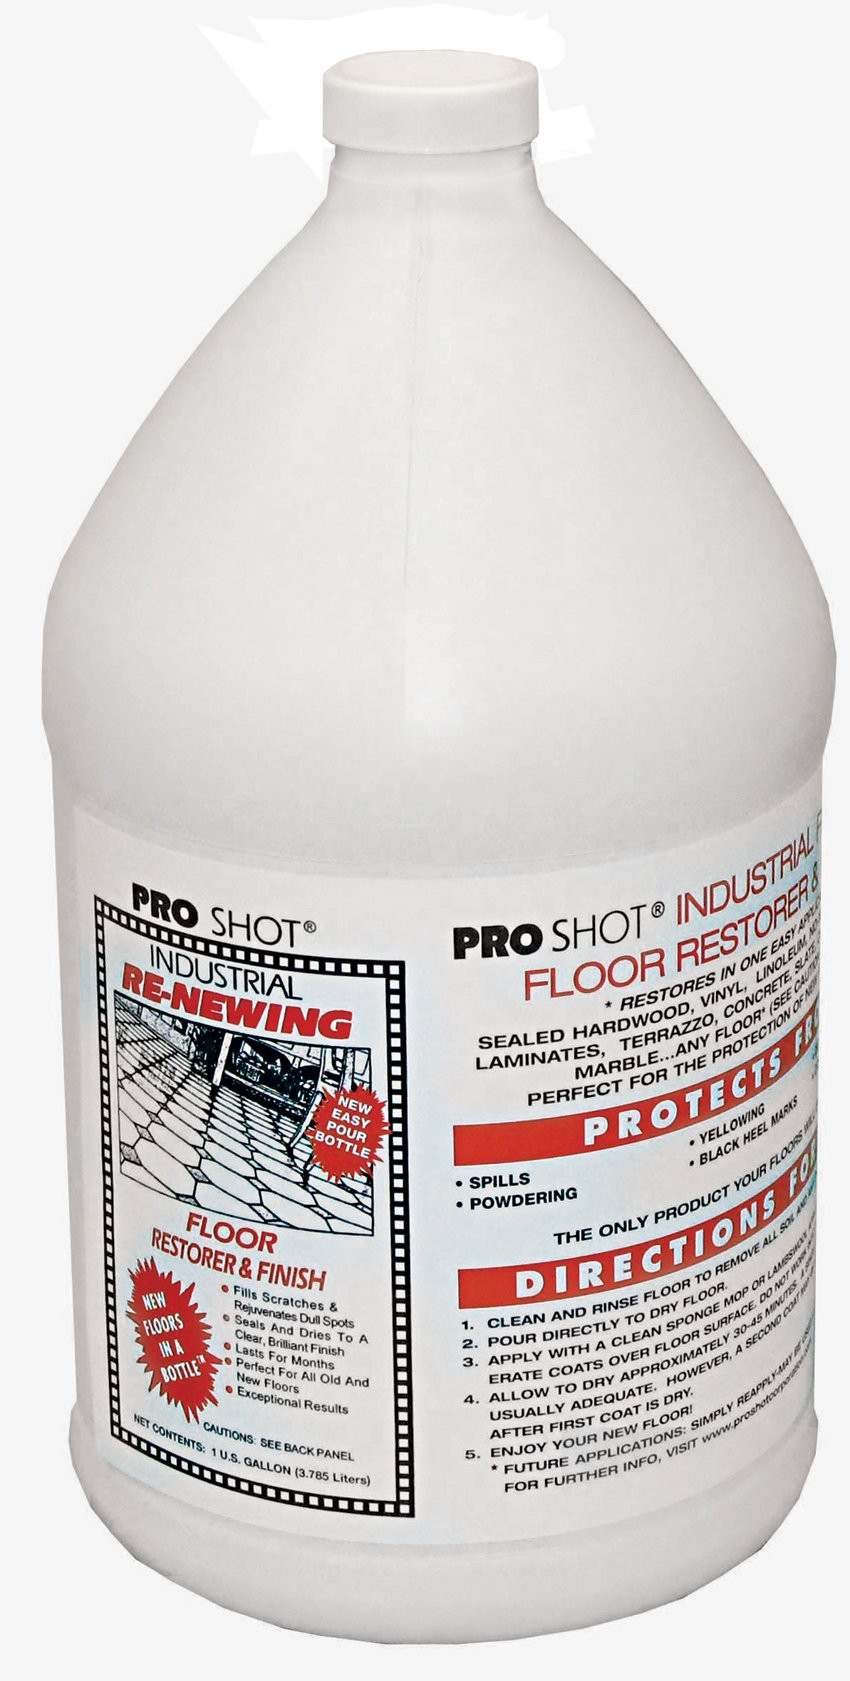 Armstrong Hardwood and Laminate Floor Cleaner 32 Oz Spray Bottle Of Amazon Com Pro Shot Industrial Re Newing Floor Restorer and Finish In Amazon Com Pro Shot Industrial Re Newing Floor Restorer and Finish 1 Gallon Petrochemical Free formula Home Kitchen